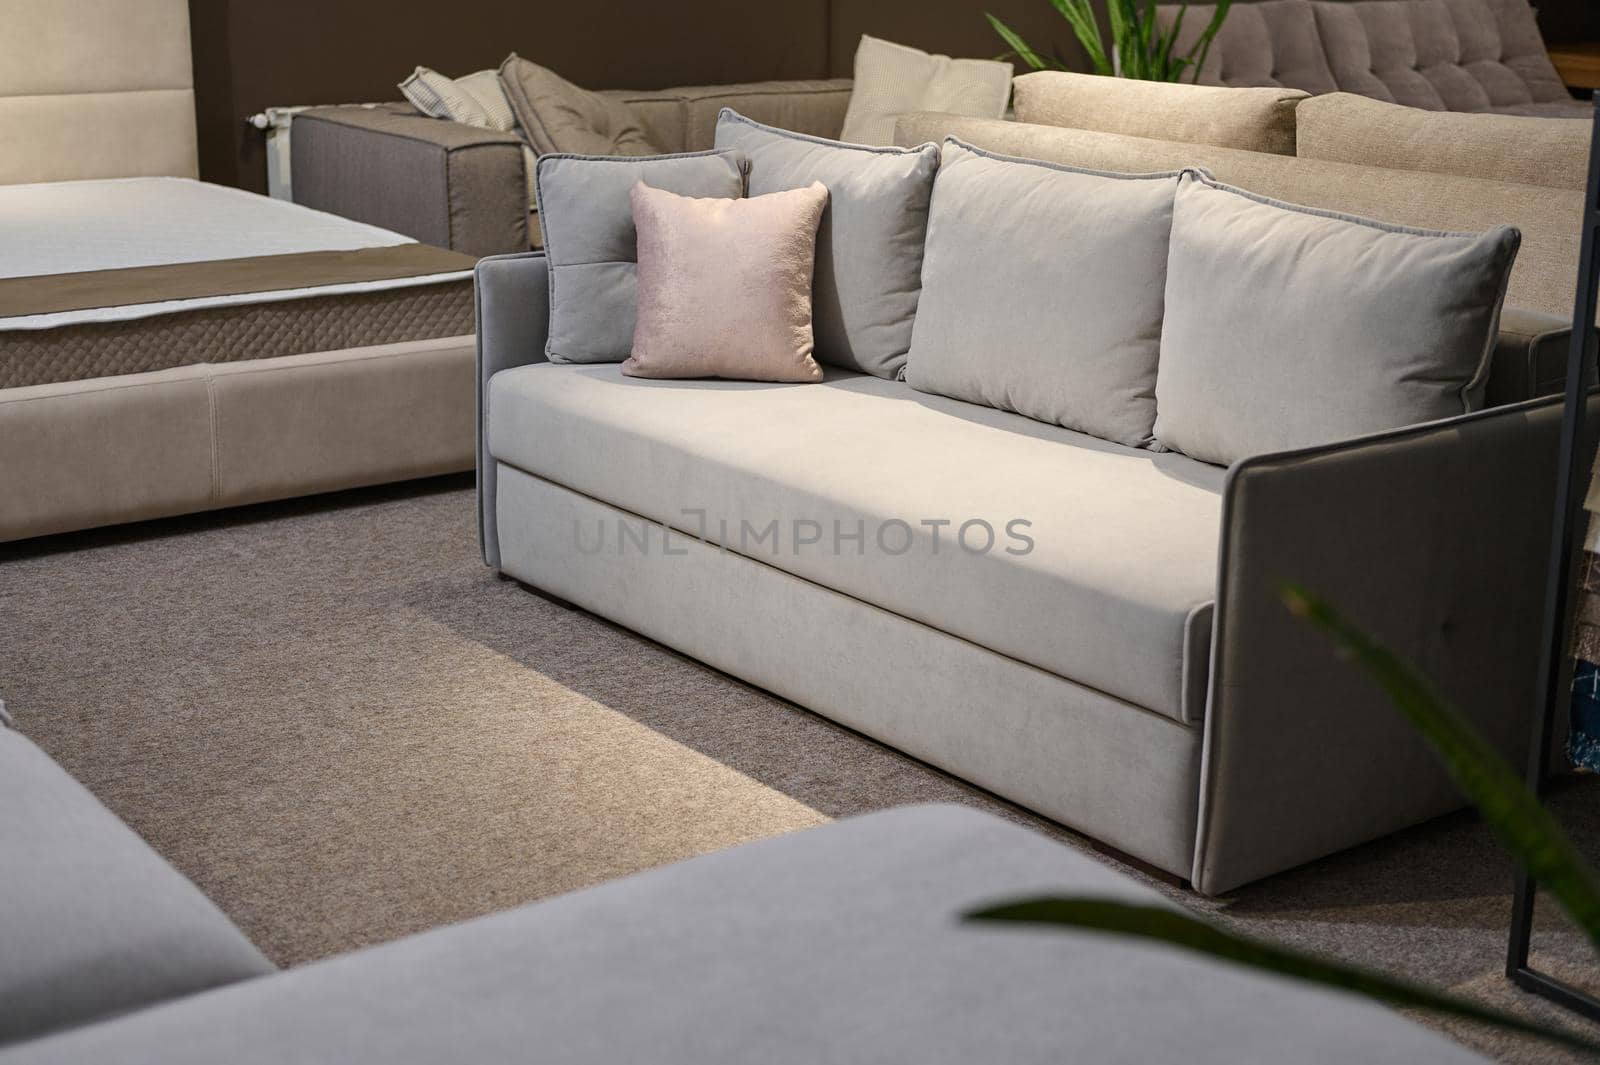 Exposition of upholstered modern comfortable light gray settee with pink cushions near a stand with swatches and fabric samples of different textures and qualities. Furniture store showroom by artgf